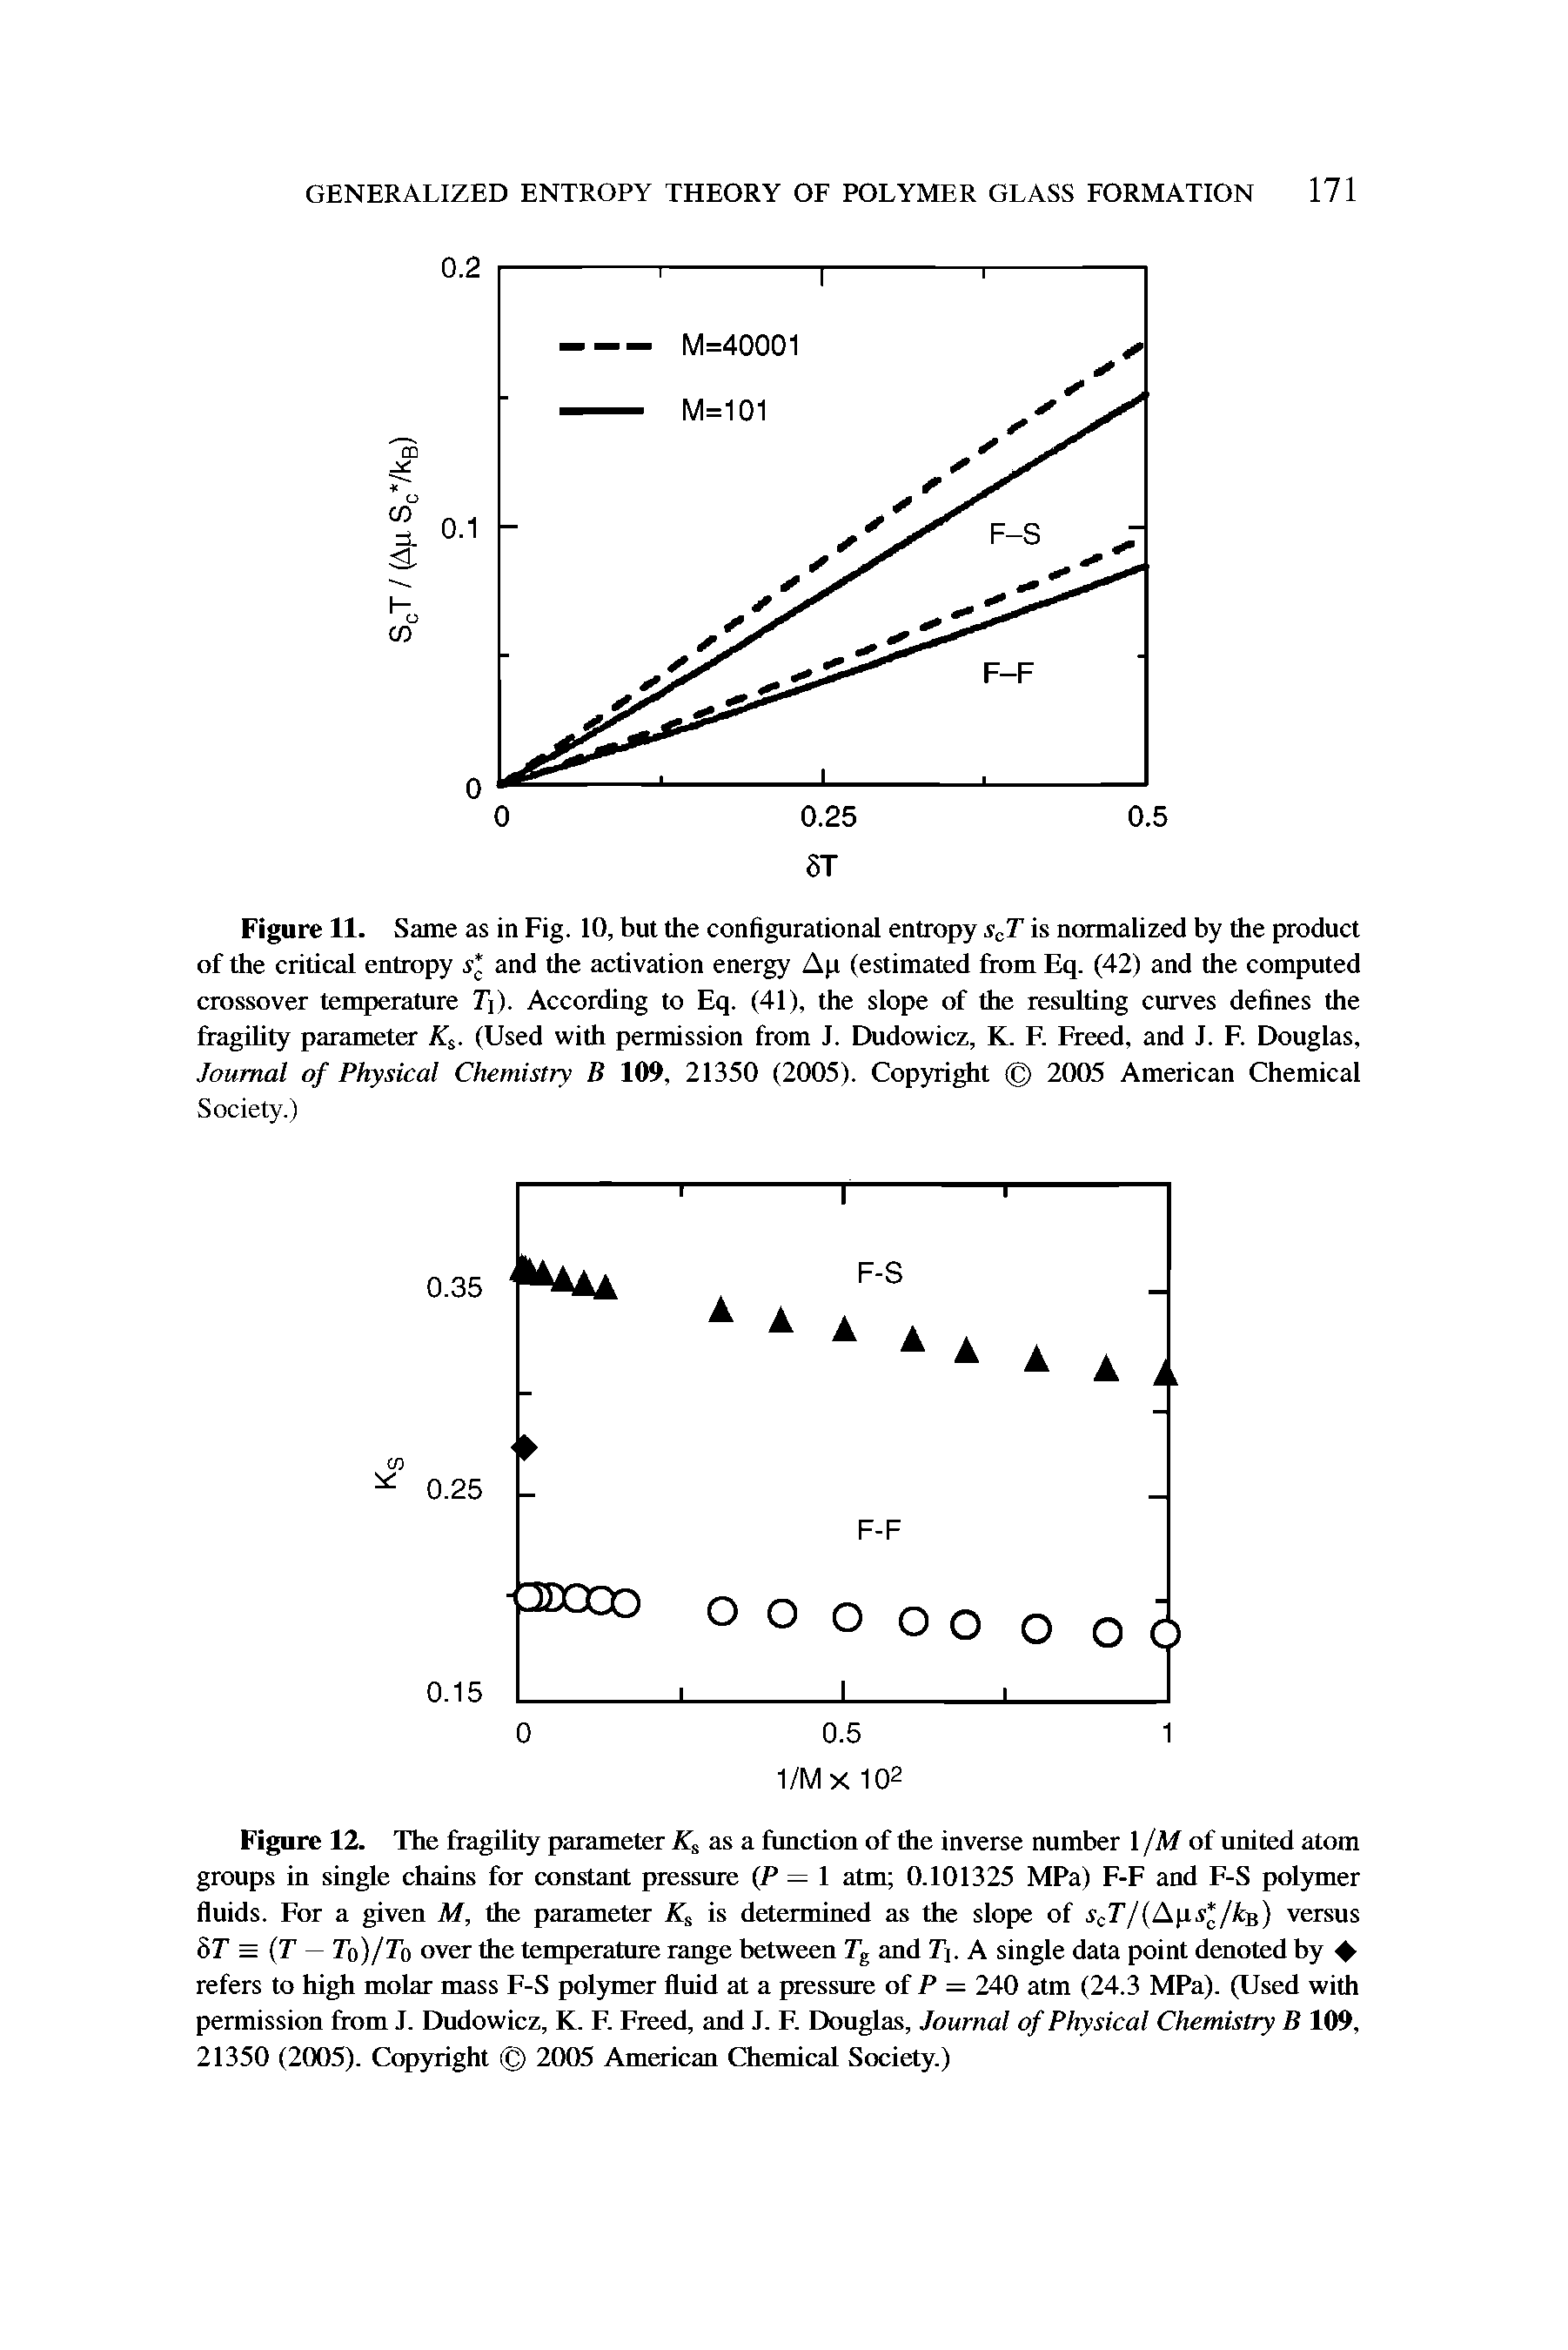 Figure 12. The fragility parameter as a function of the inverse number 1 /M of united atom groups in single chains for constant pressure (P = 1 atm 0.101325 MPa) F-F and F-S polymer fluids. For a given M, the parameter is determined as the slope of ScT/( isl/k ) versus hT = T — Tq)/Tq over the temperature range between Tg and Tj. A single data point denoted by refers to high molar mass F-S polymer fluid at a pressure of P = 240 atm (24.3 MPa). (Used with permission from J. Dudowicz, K. F. Freed, and J. F. Douglas, Journal of Physical Chemistry B 109, 21350 (2005). Copyright 2005 American Chemical Society.)...